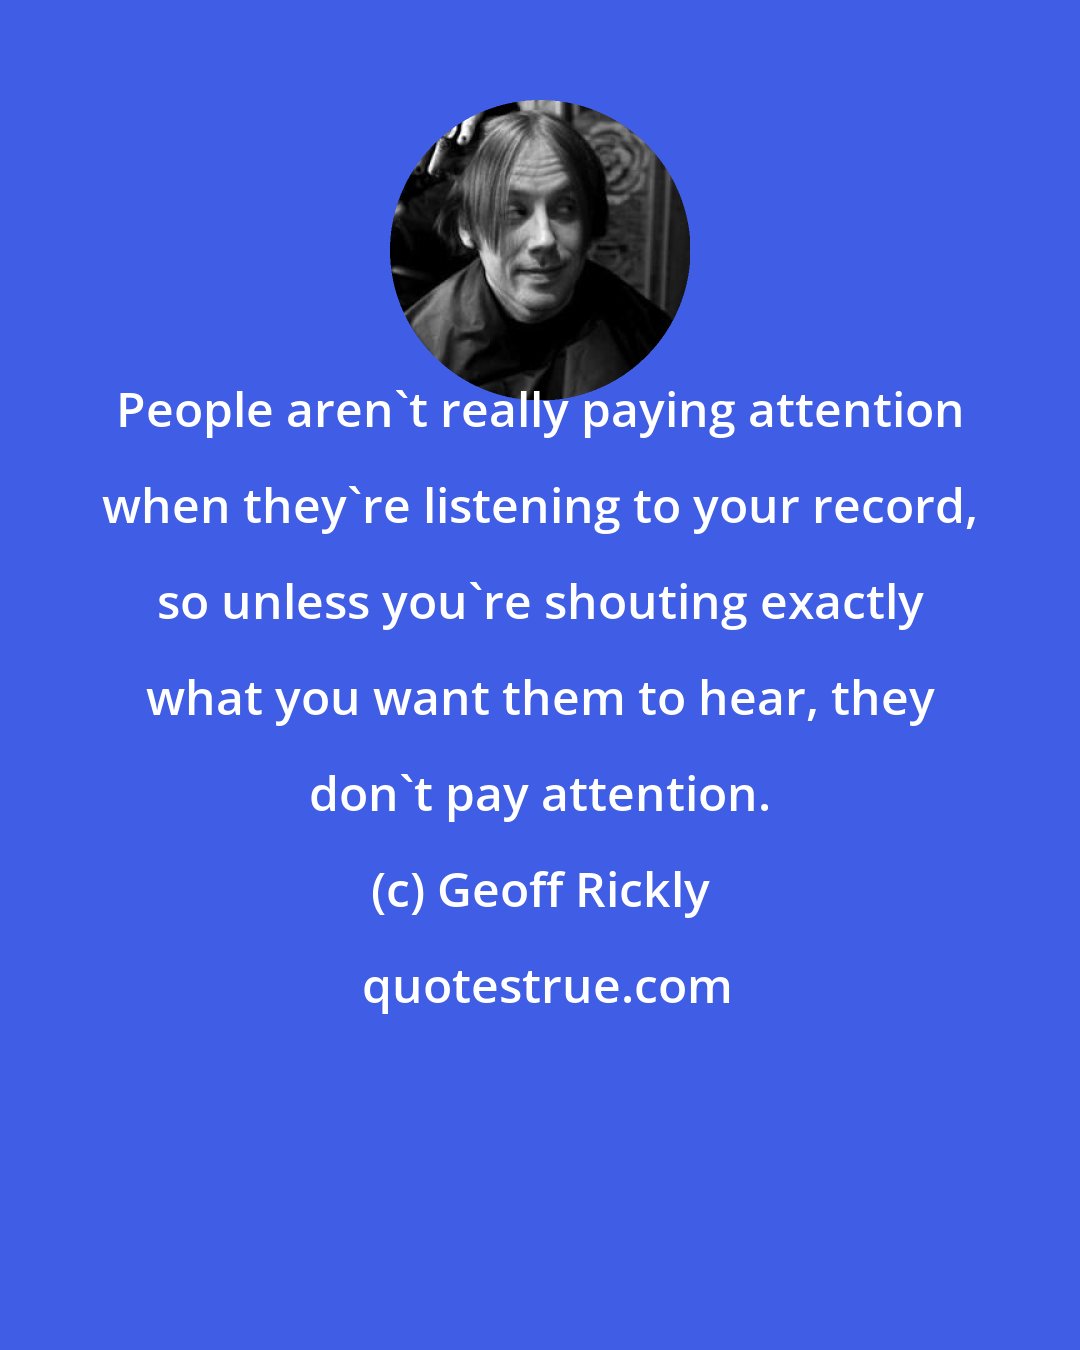 Geoff Rickly: People aren't really paying attention when they're listening to your record, so unless you're shouting exactly what you want them to hear, they don't pay attention.